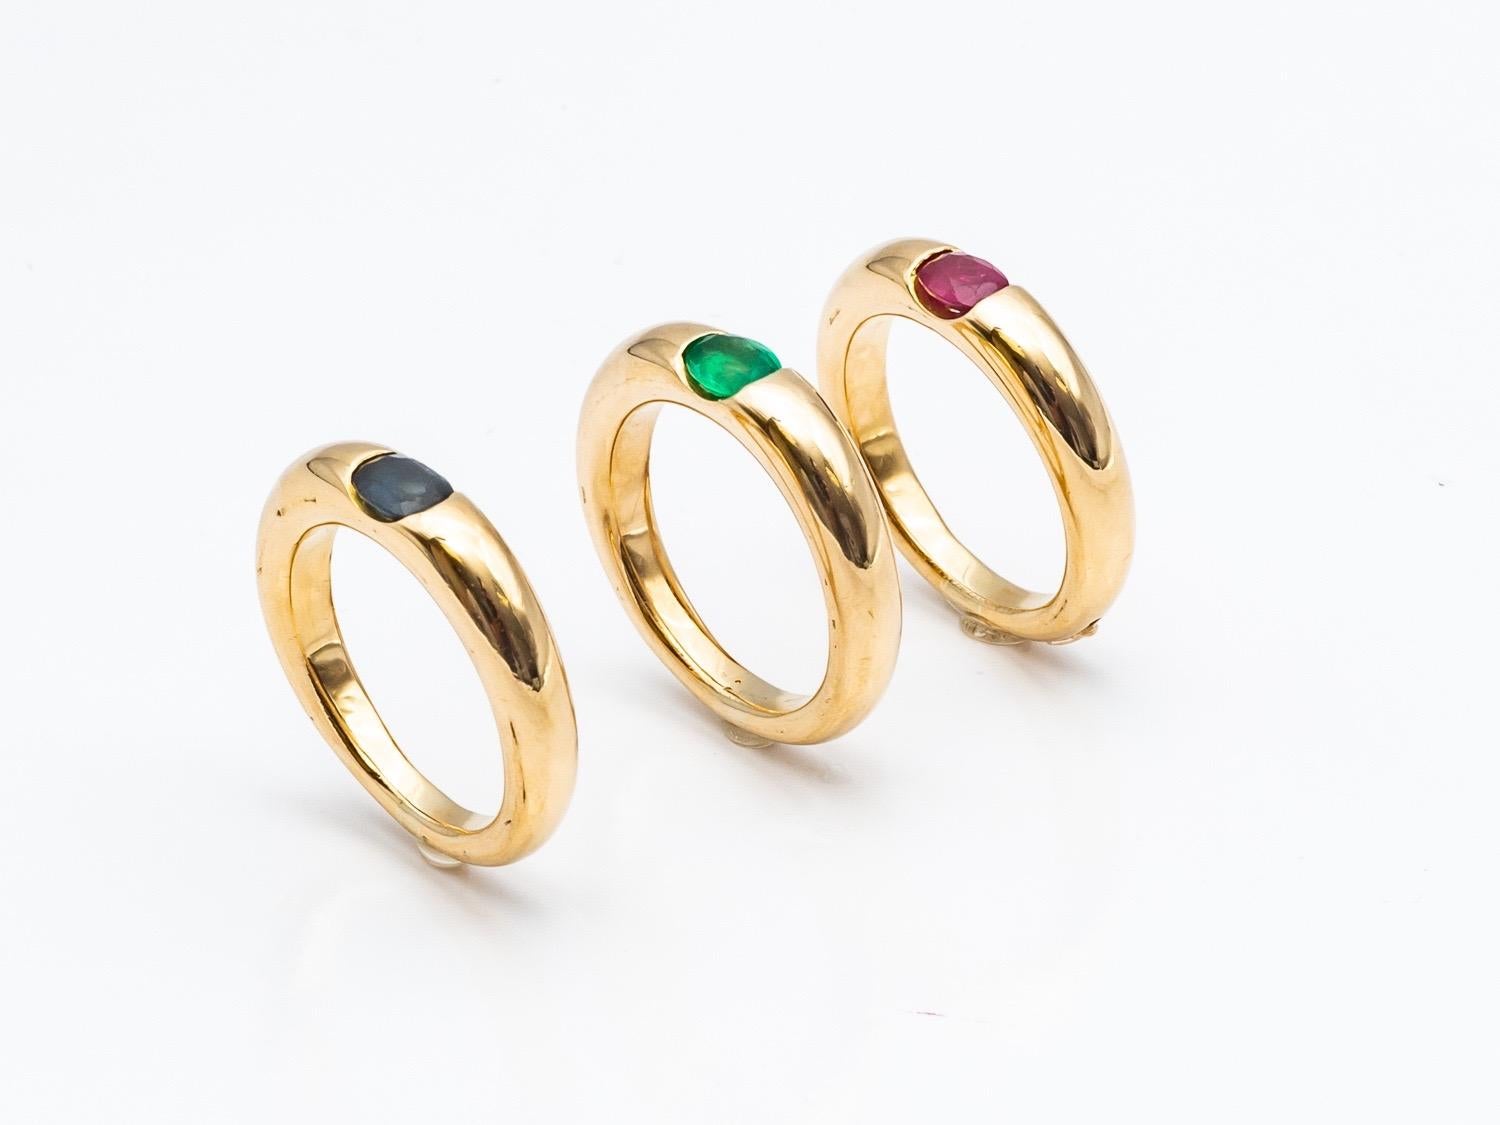 Three 18 Karat Gold Bangles Rings Set with an Emerald, a Sapphire, and a Ruby 6